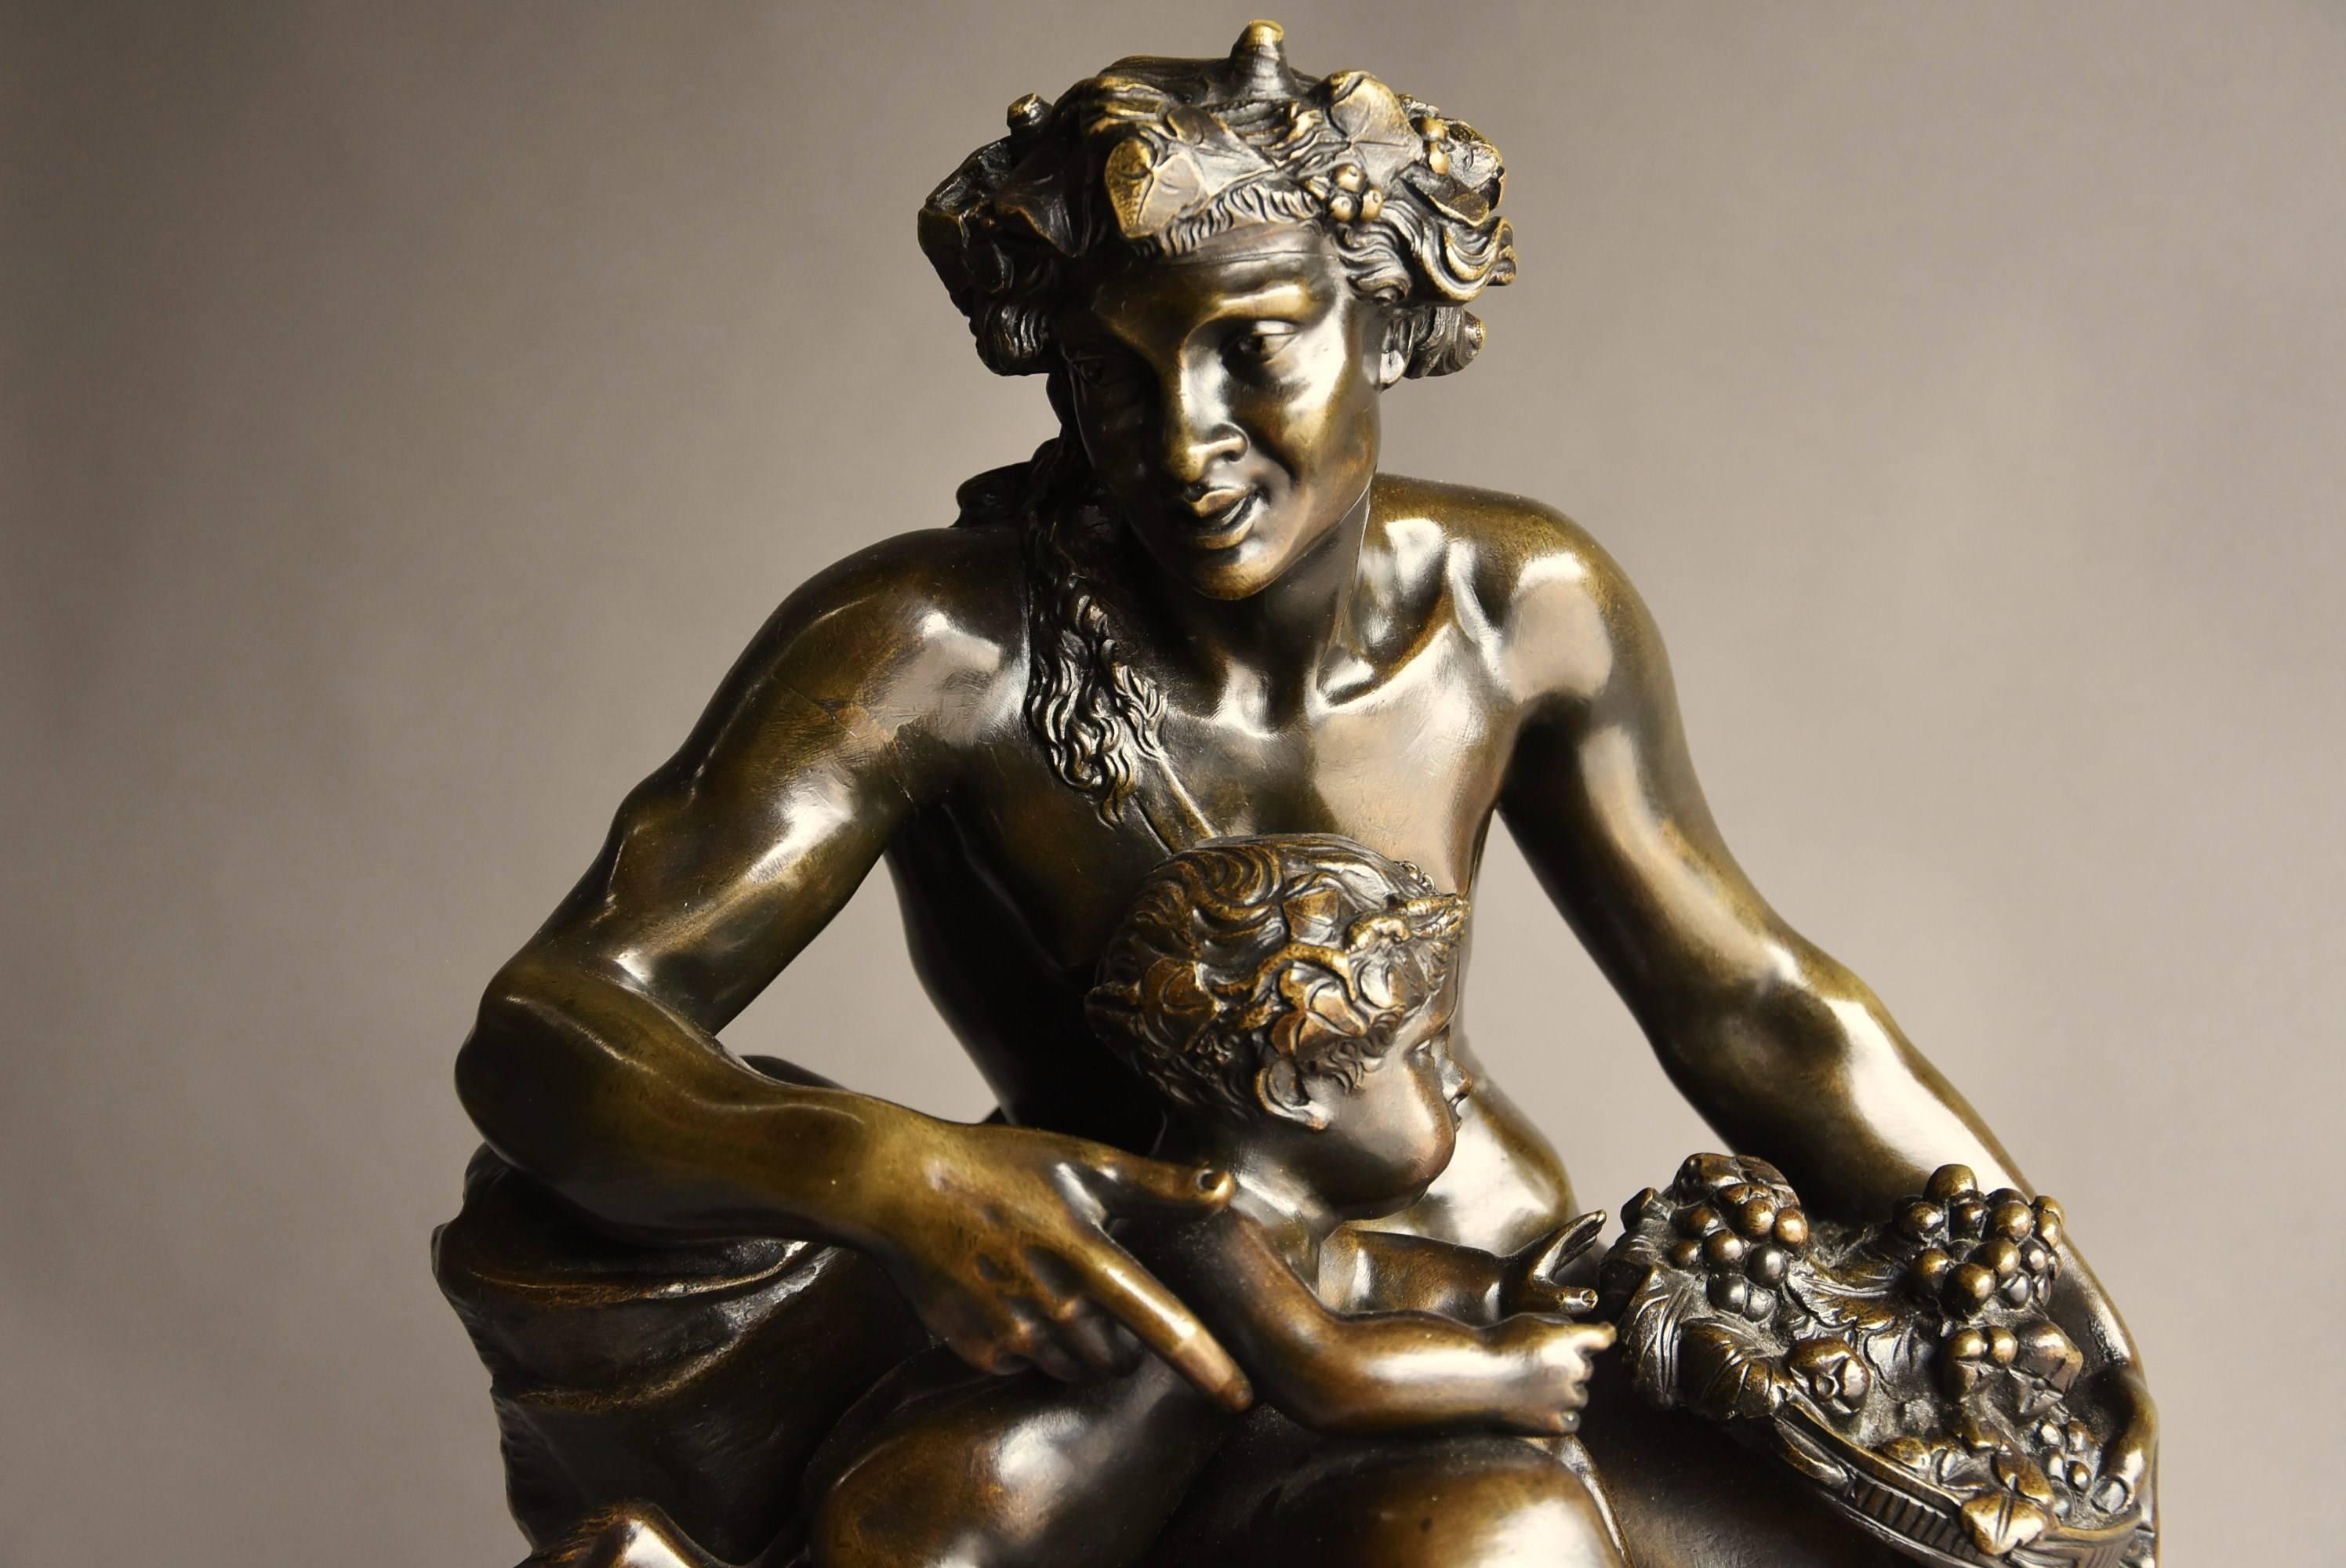 A large mid-19th century, French bronze group of a Satyr and two fauns After Claude Michel Clodian (1738-1814), bearing brass plaque 'Education de Bacchus' and signature to back.

This group consists of a Satyr with small horns to his head, seated